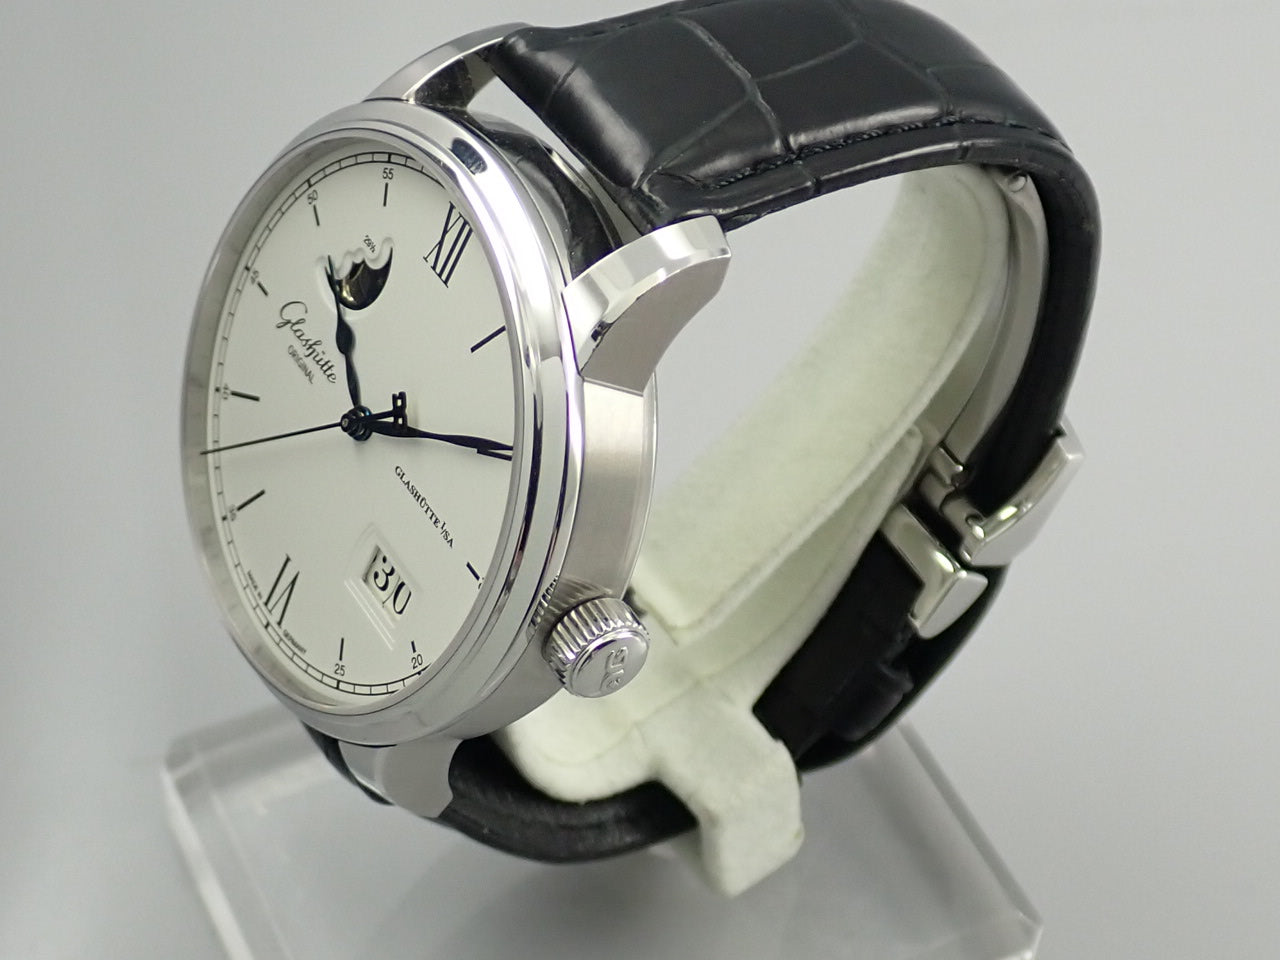 Glashütte Original Senator Excellence Panorama Date Moon Phase &lt;Warranty Box and Others&gt;